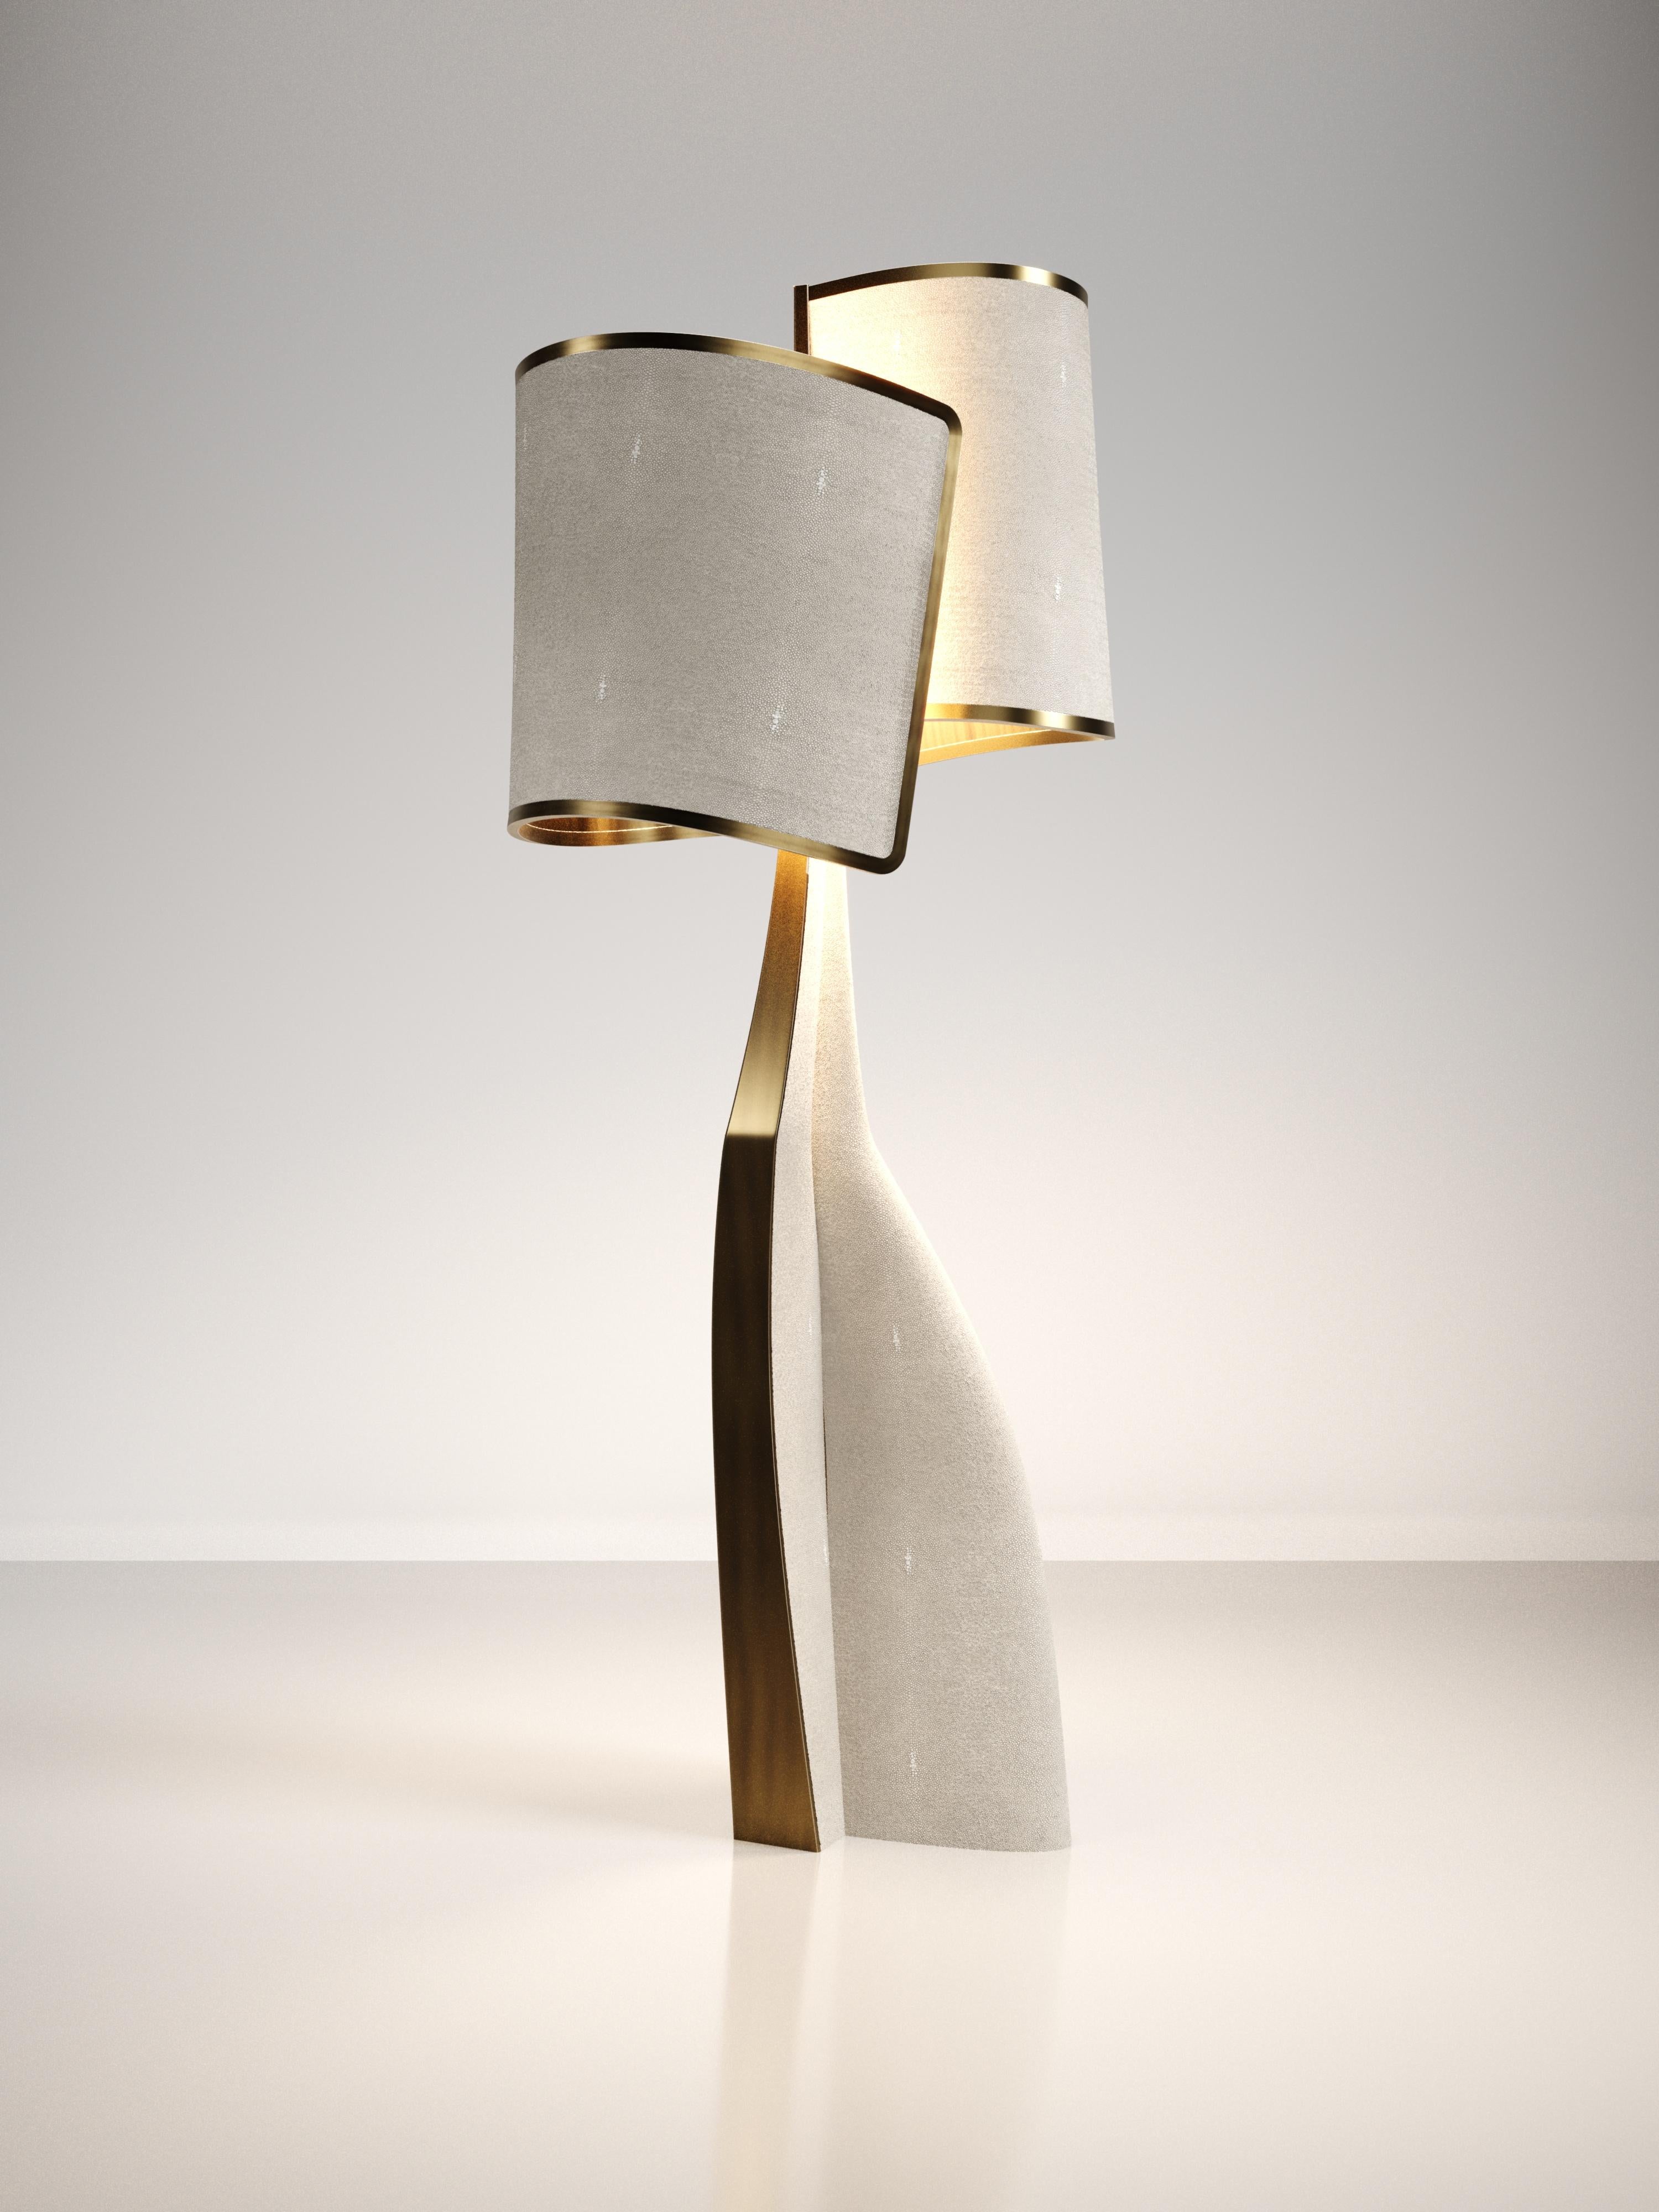 Art Deco Sculptural Floor Lamp in Shagreen Inlay and Bronze-Patina Brass by Kifu Paris For Sale